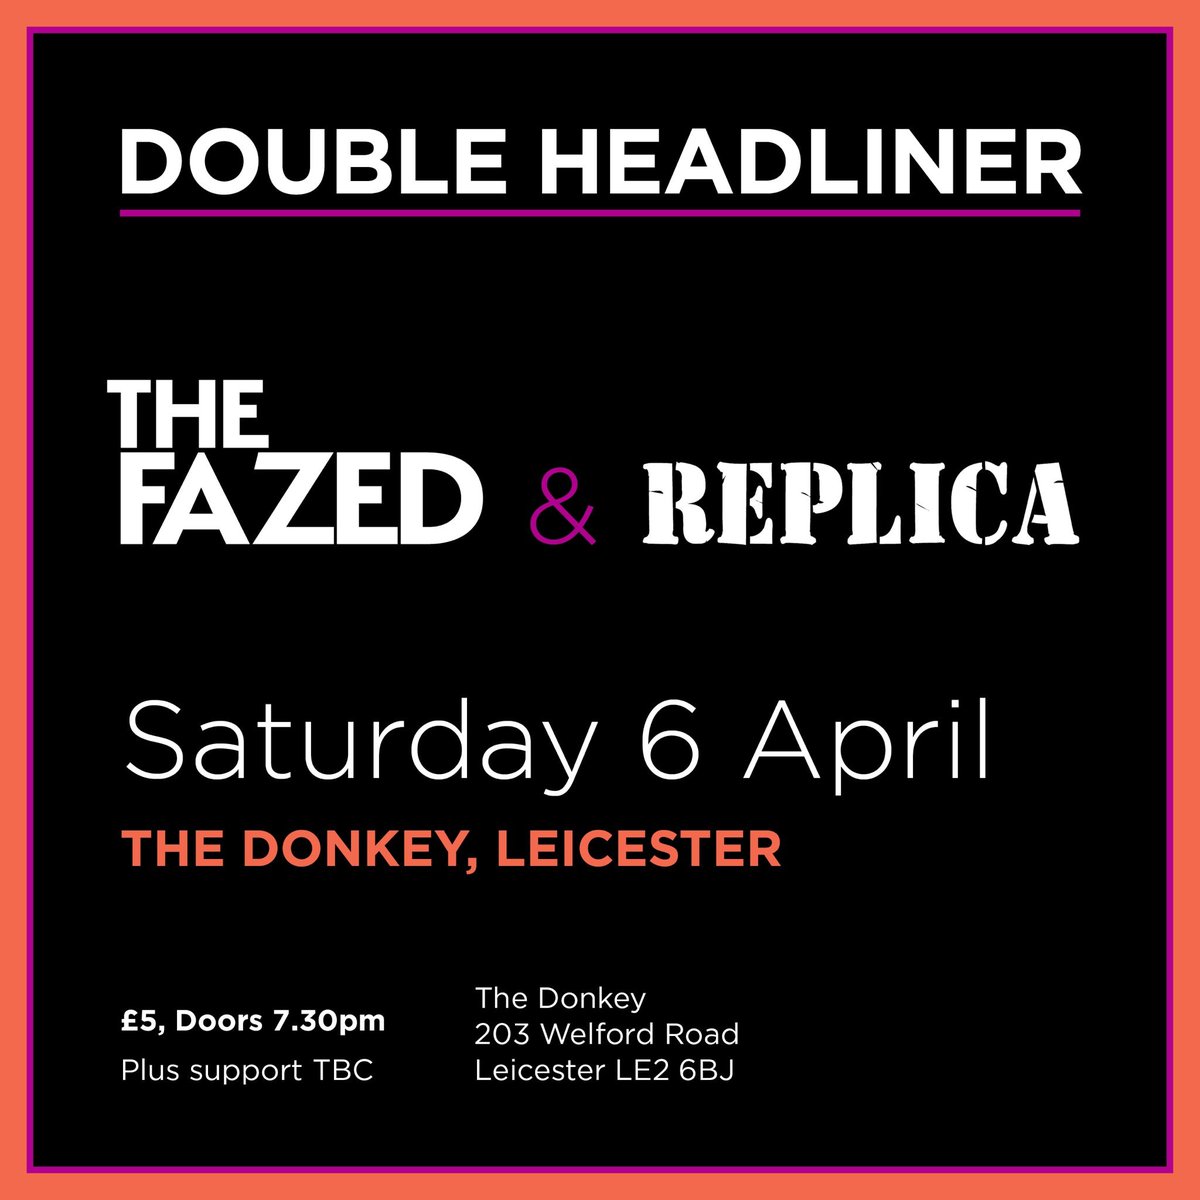 6 APRIL! 👊 THE FAZED NEW SINGLE RELEASE AND DOUBLE HEADLINER SHOW AT THE DONKEY WITH THE EXCELLENT REPLICA! #newmusic2024 #livemusic #DezafRecords